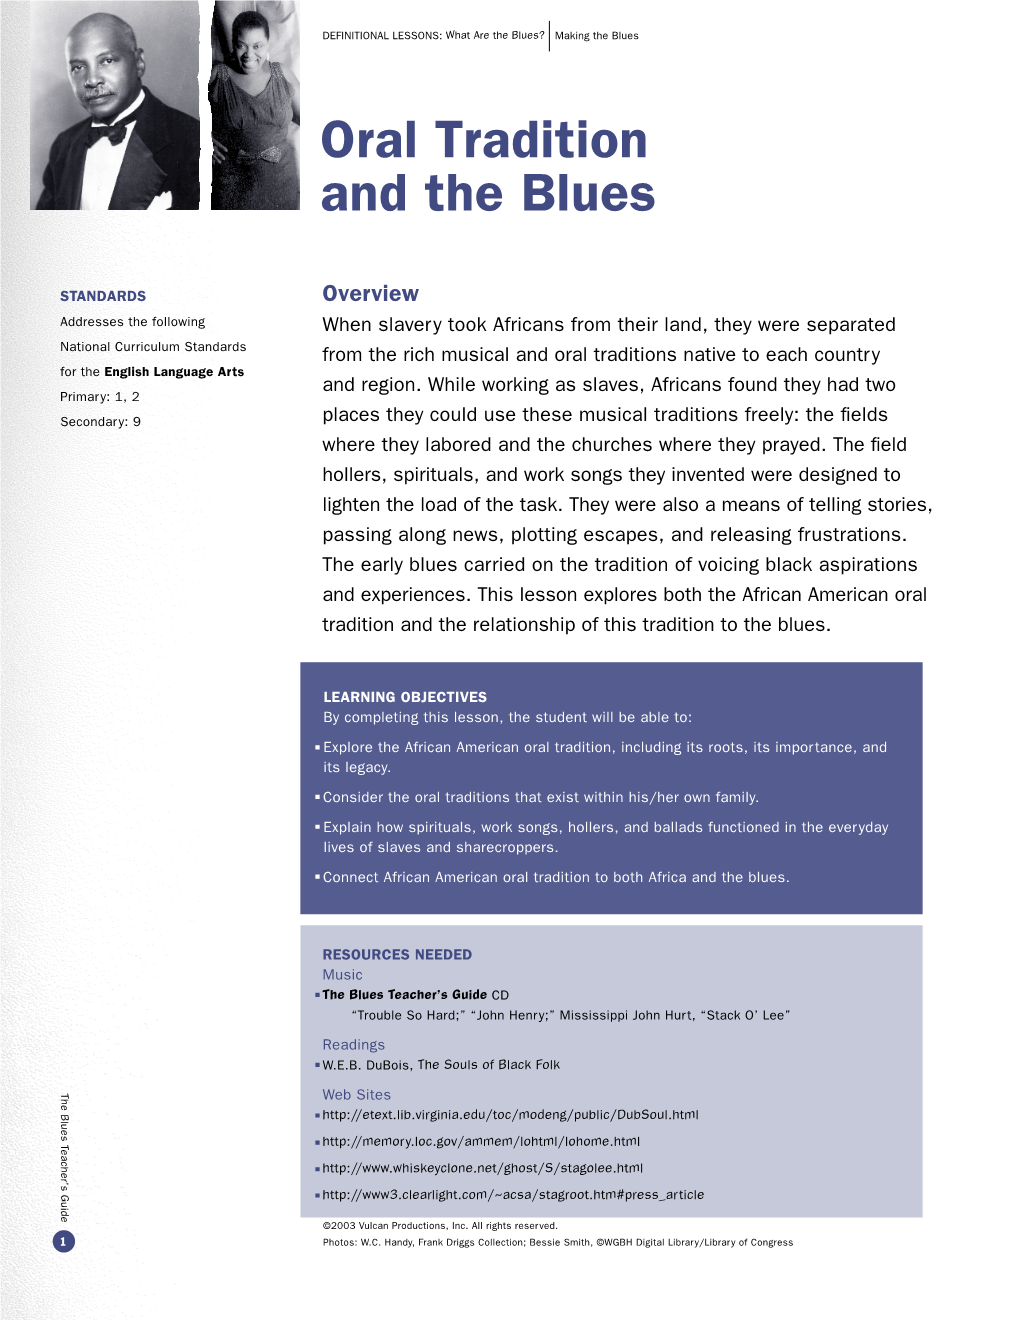 Oral Tradition and the Blues Fire Contains Good References to African American Oral Tradition